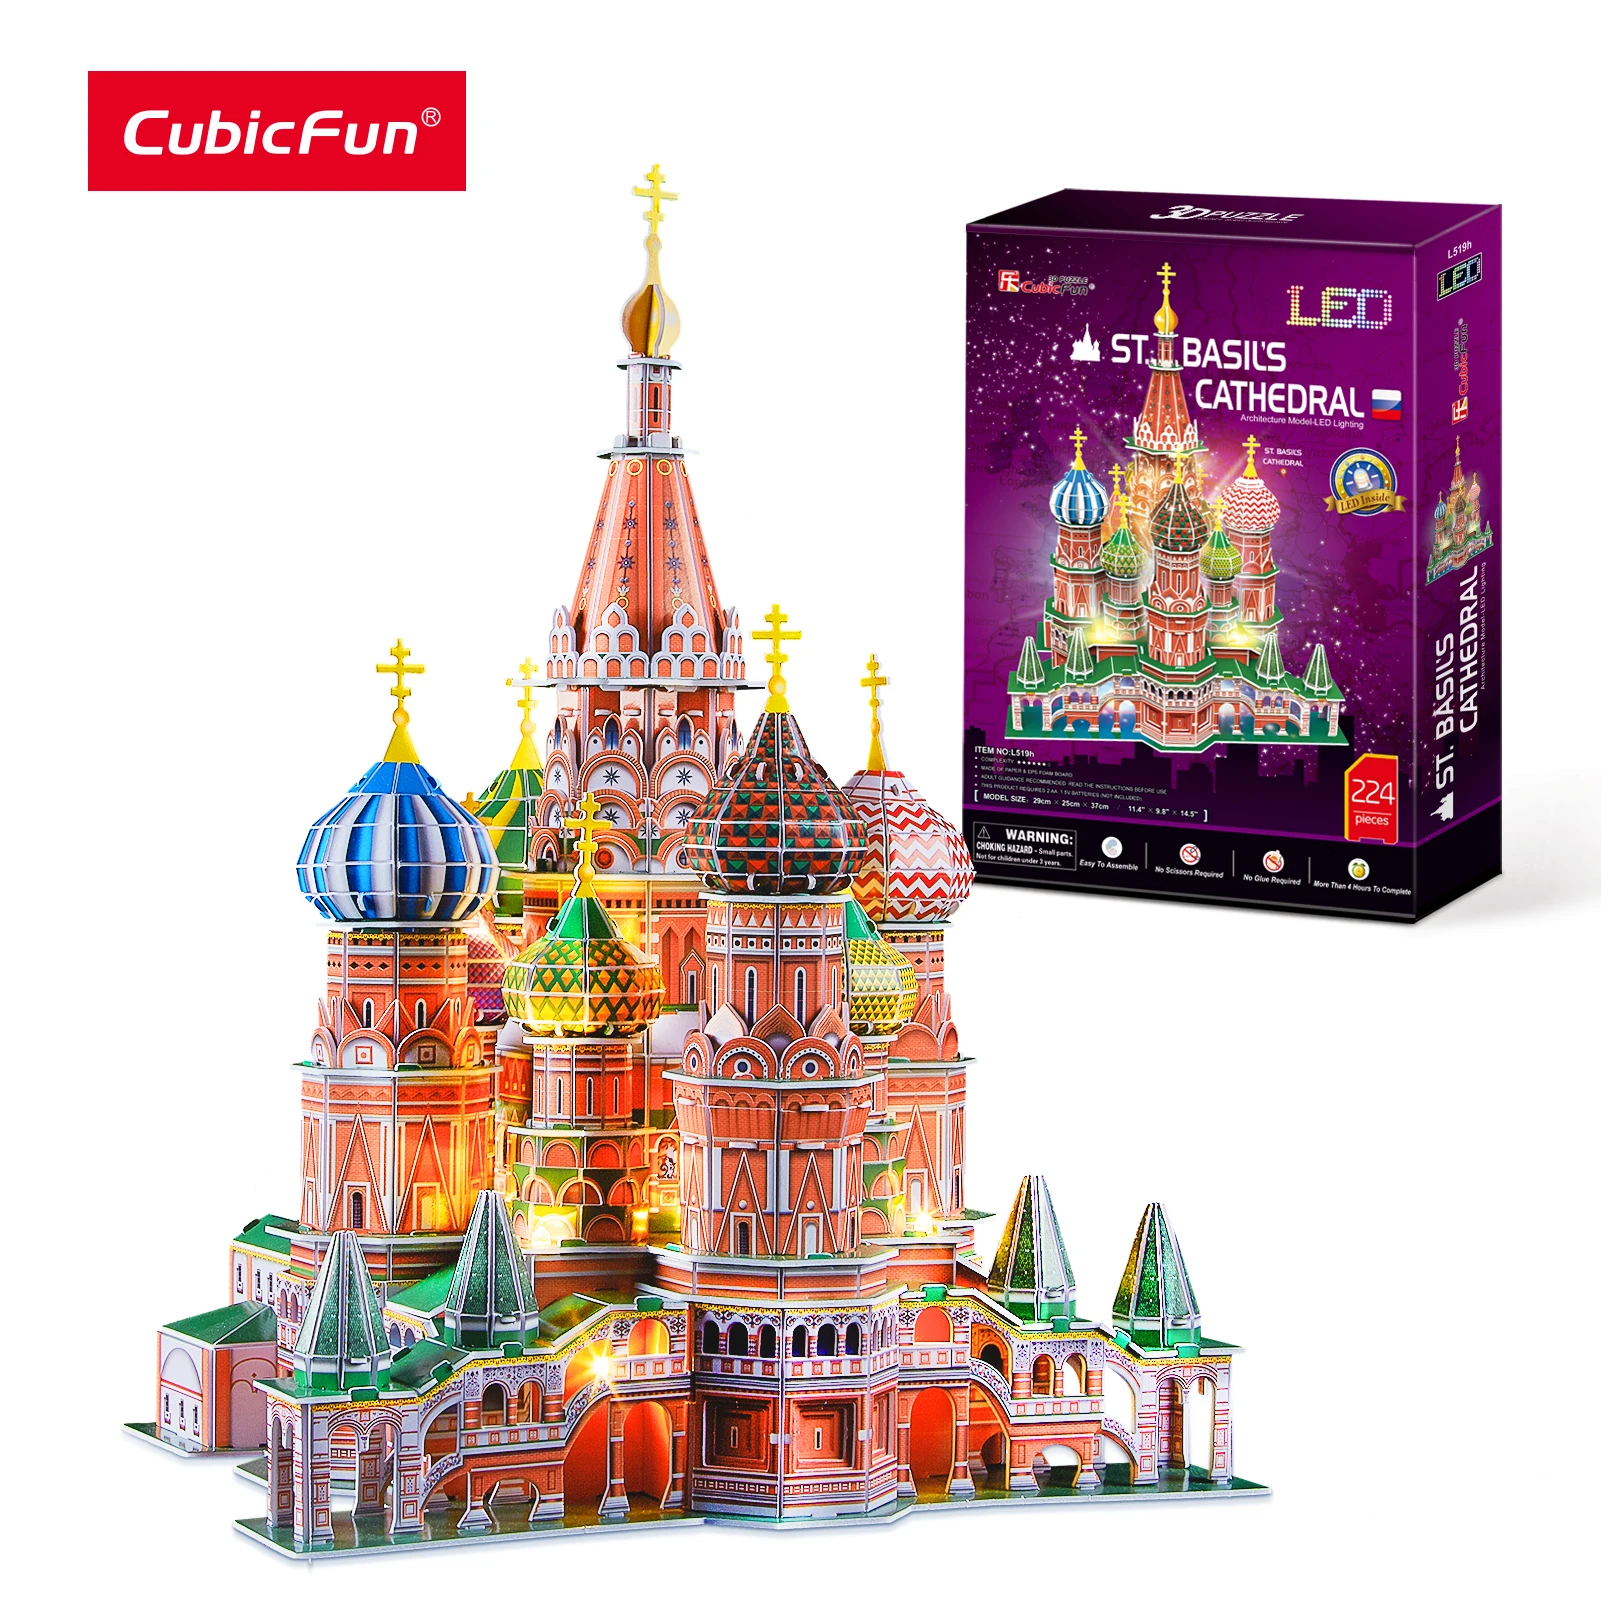 CubicFun 3D Puzzles LED Russia Cathedral Model St.Basil's Cathedral Architecture Building Church Kits Toys for Adults Kids cubicfun 3d puzzles led san francisco cityline model kits lighting architecture toys gifts golden gate bridge for adults kids